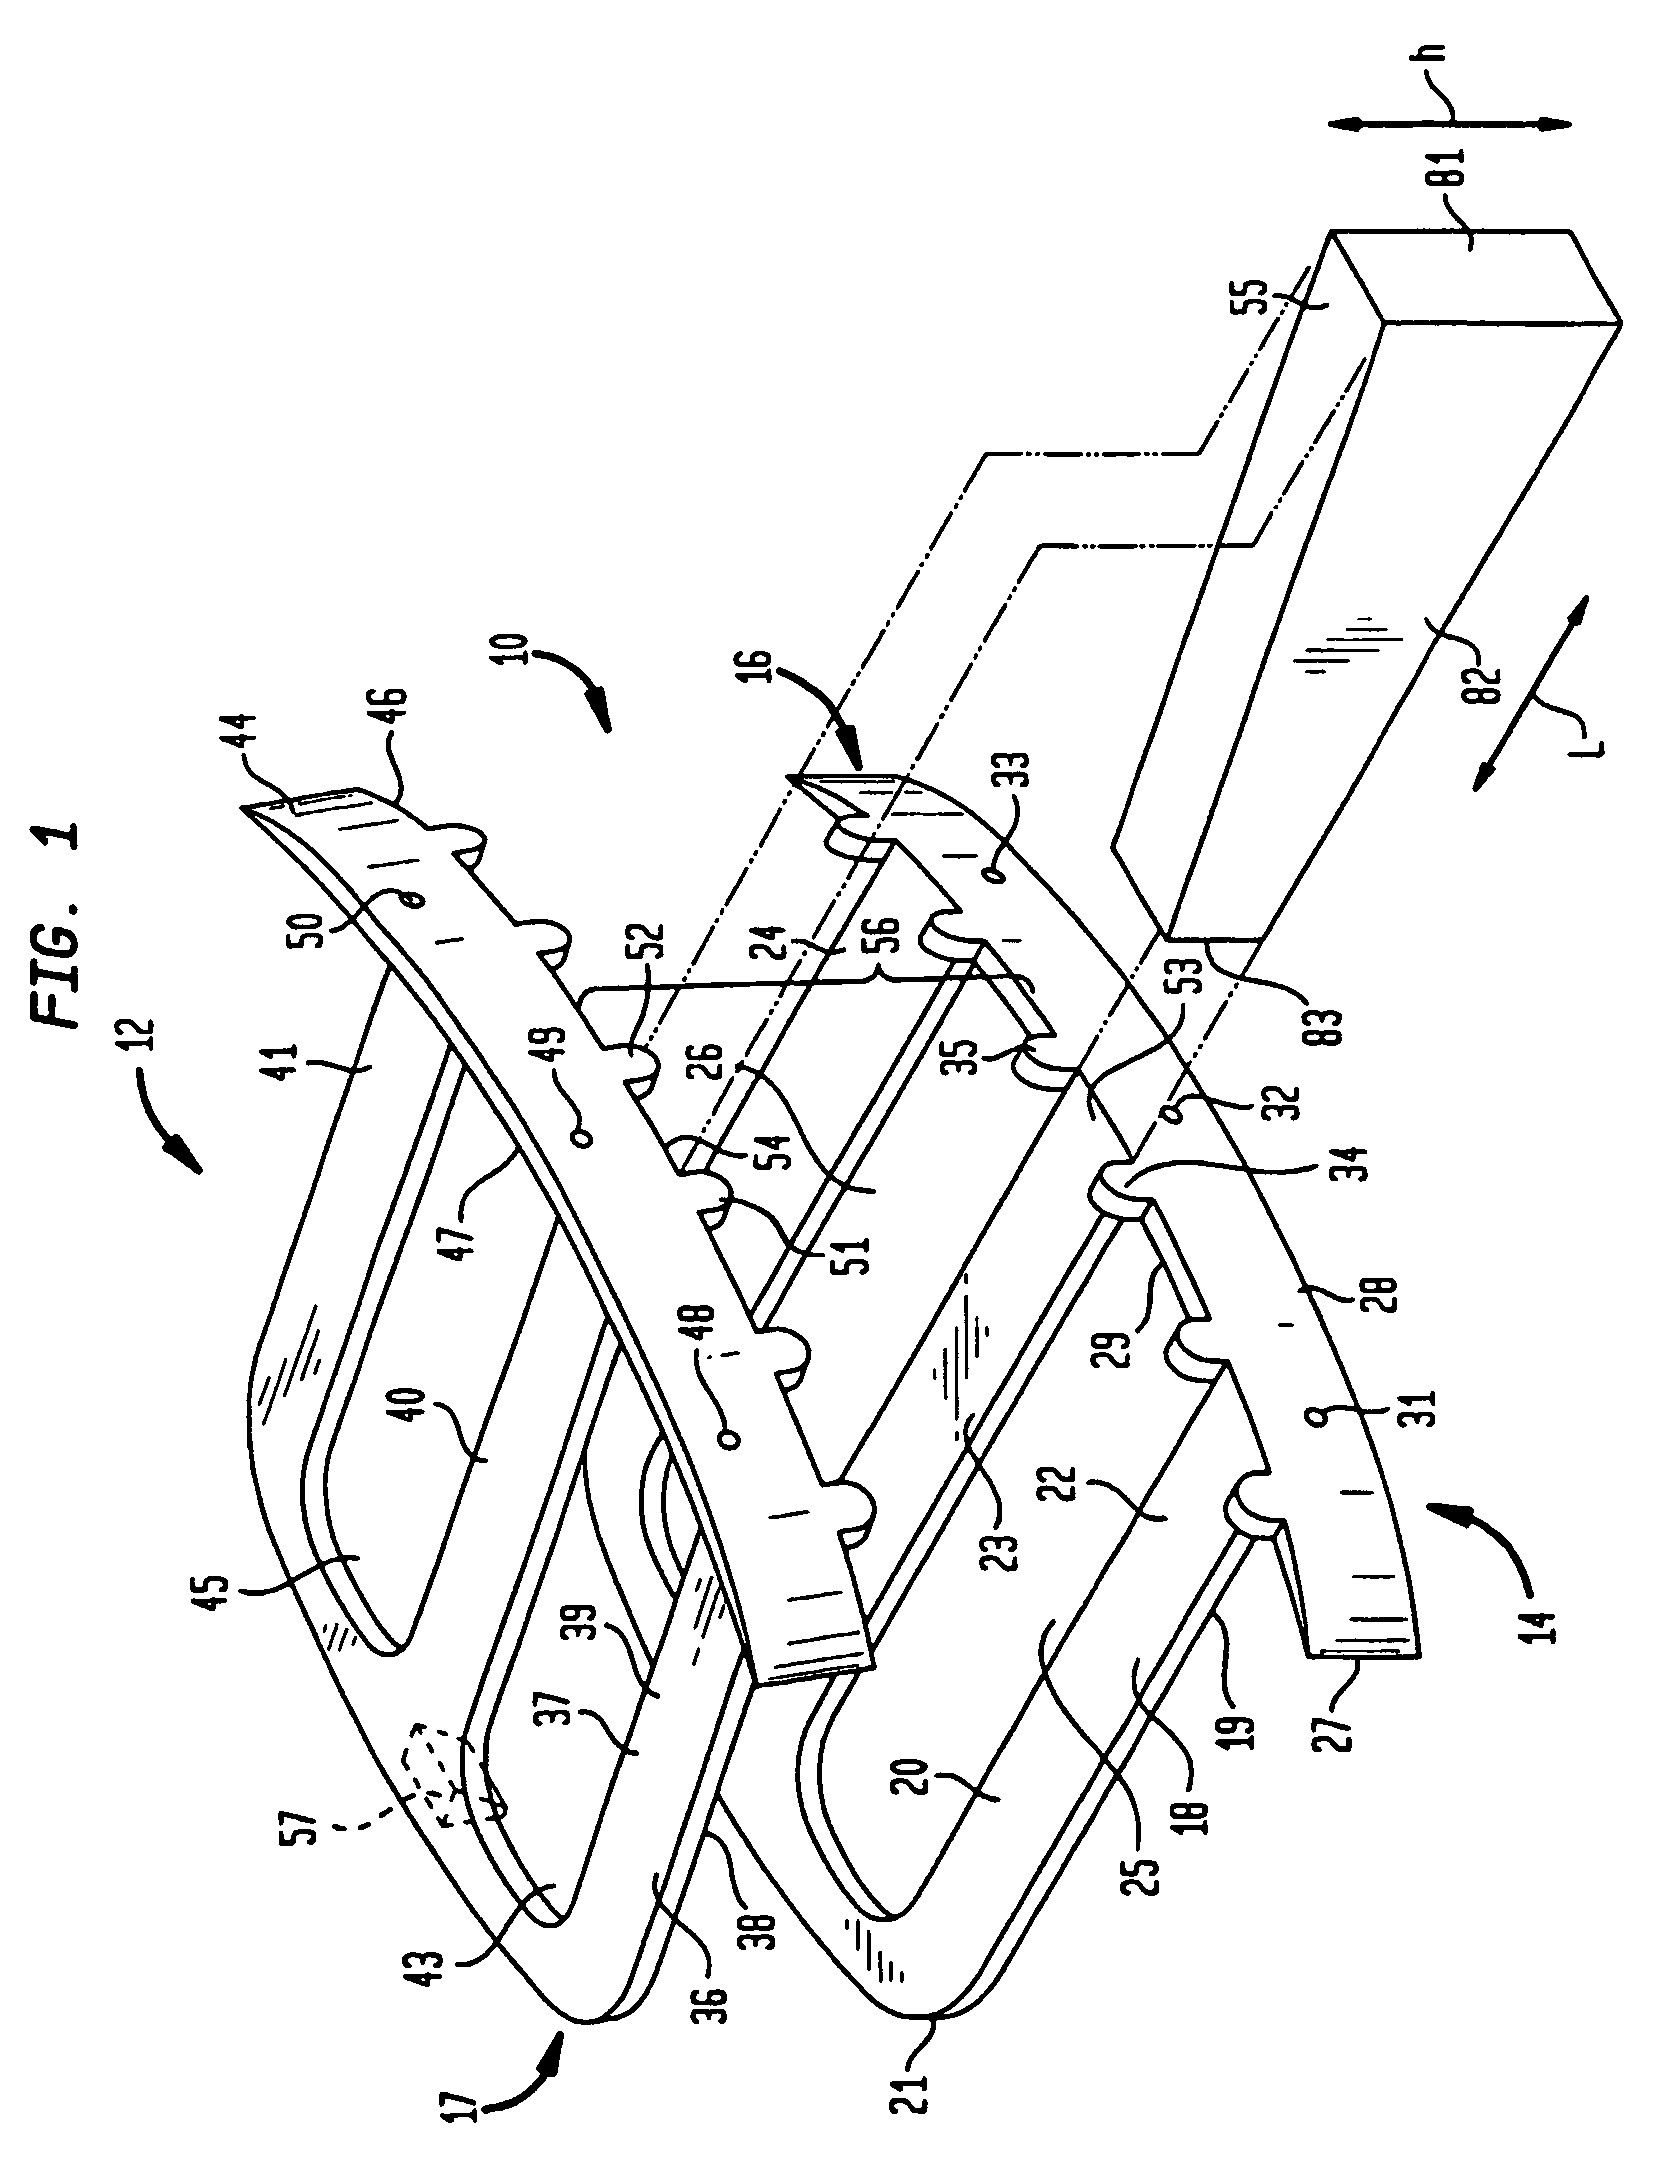 Interbody spinal fusion device